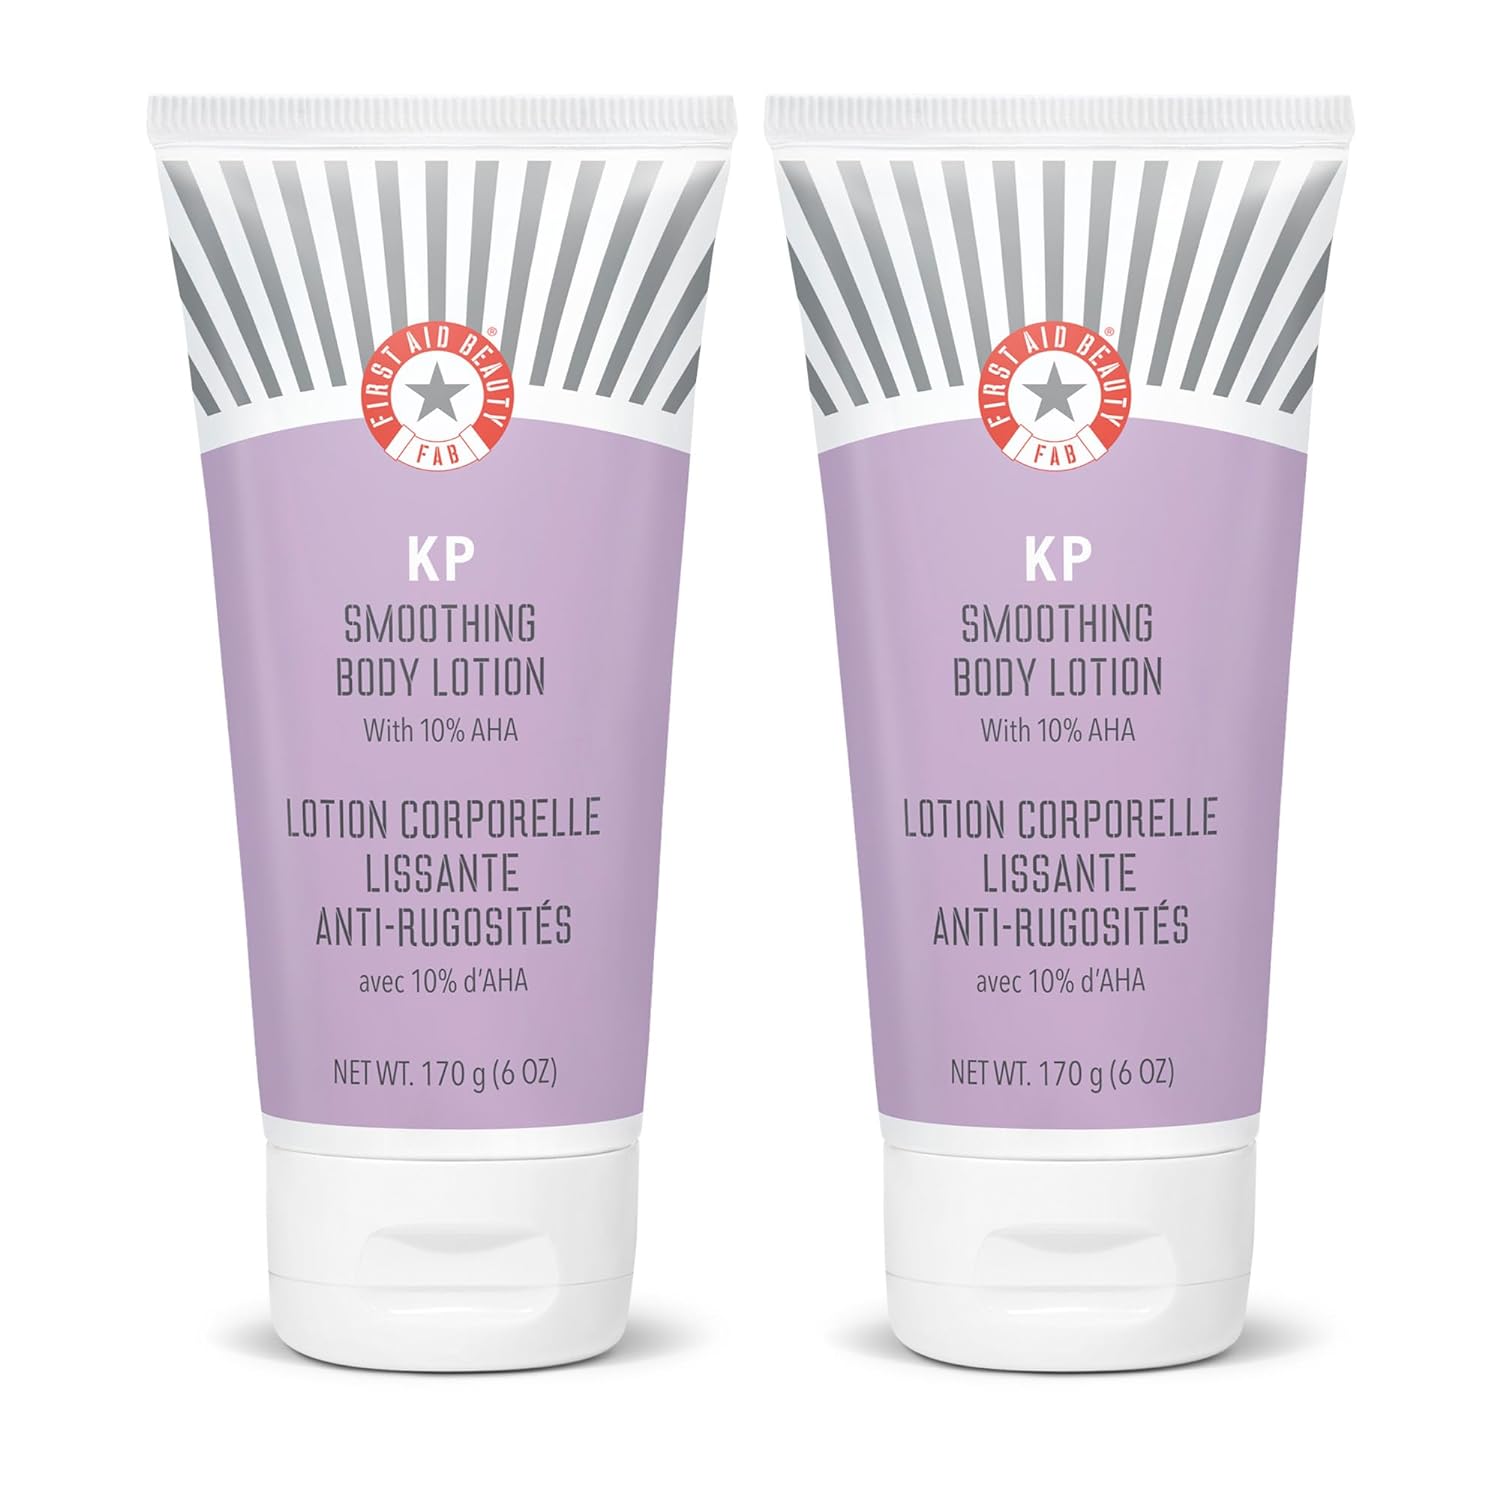 First Aid Beauty KP Smoothing Body Lotion Double Pack – Chemically Exfoliates and Moisturizes with 10% Lactic Acid (AHA), Urea, Colloidal Oatmeal and Ceramides – Two 6 oz Tubes